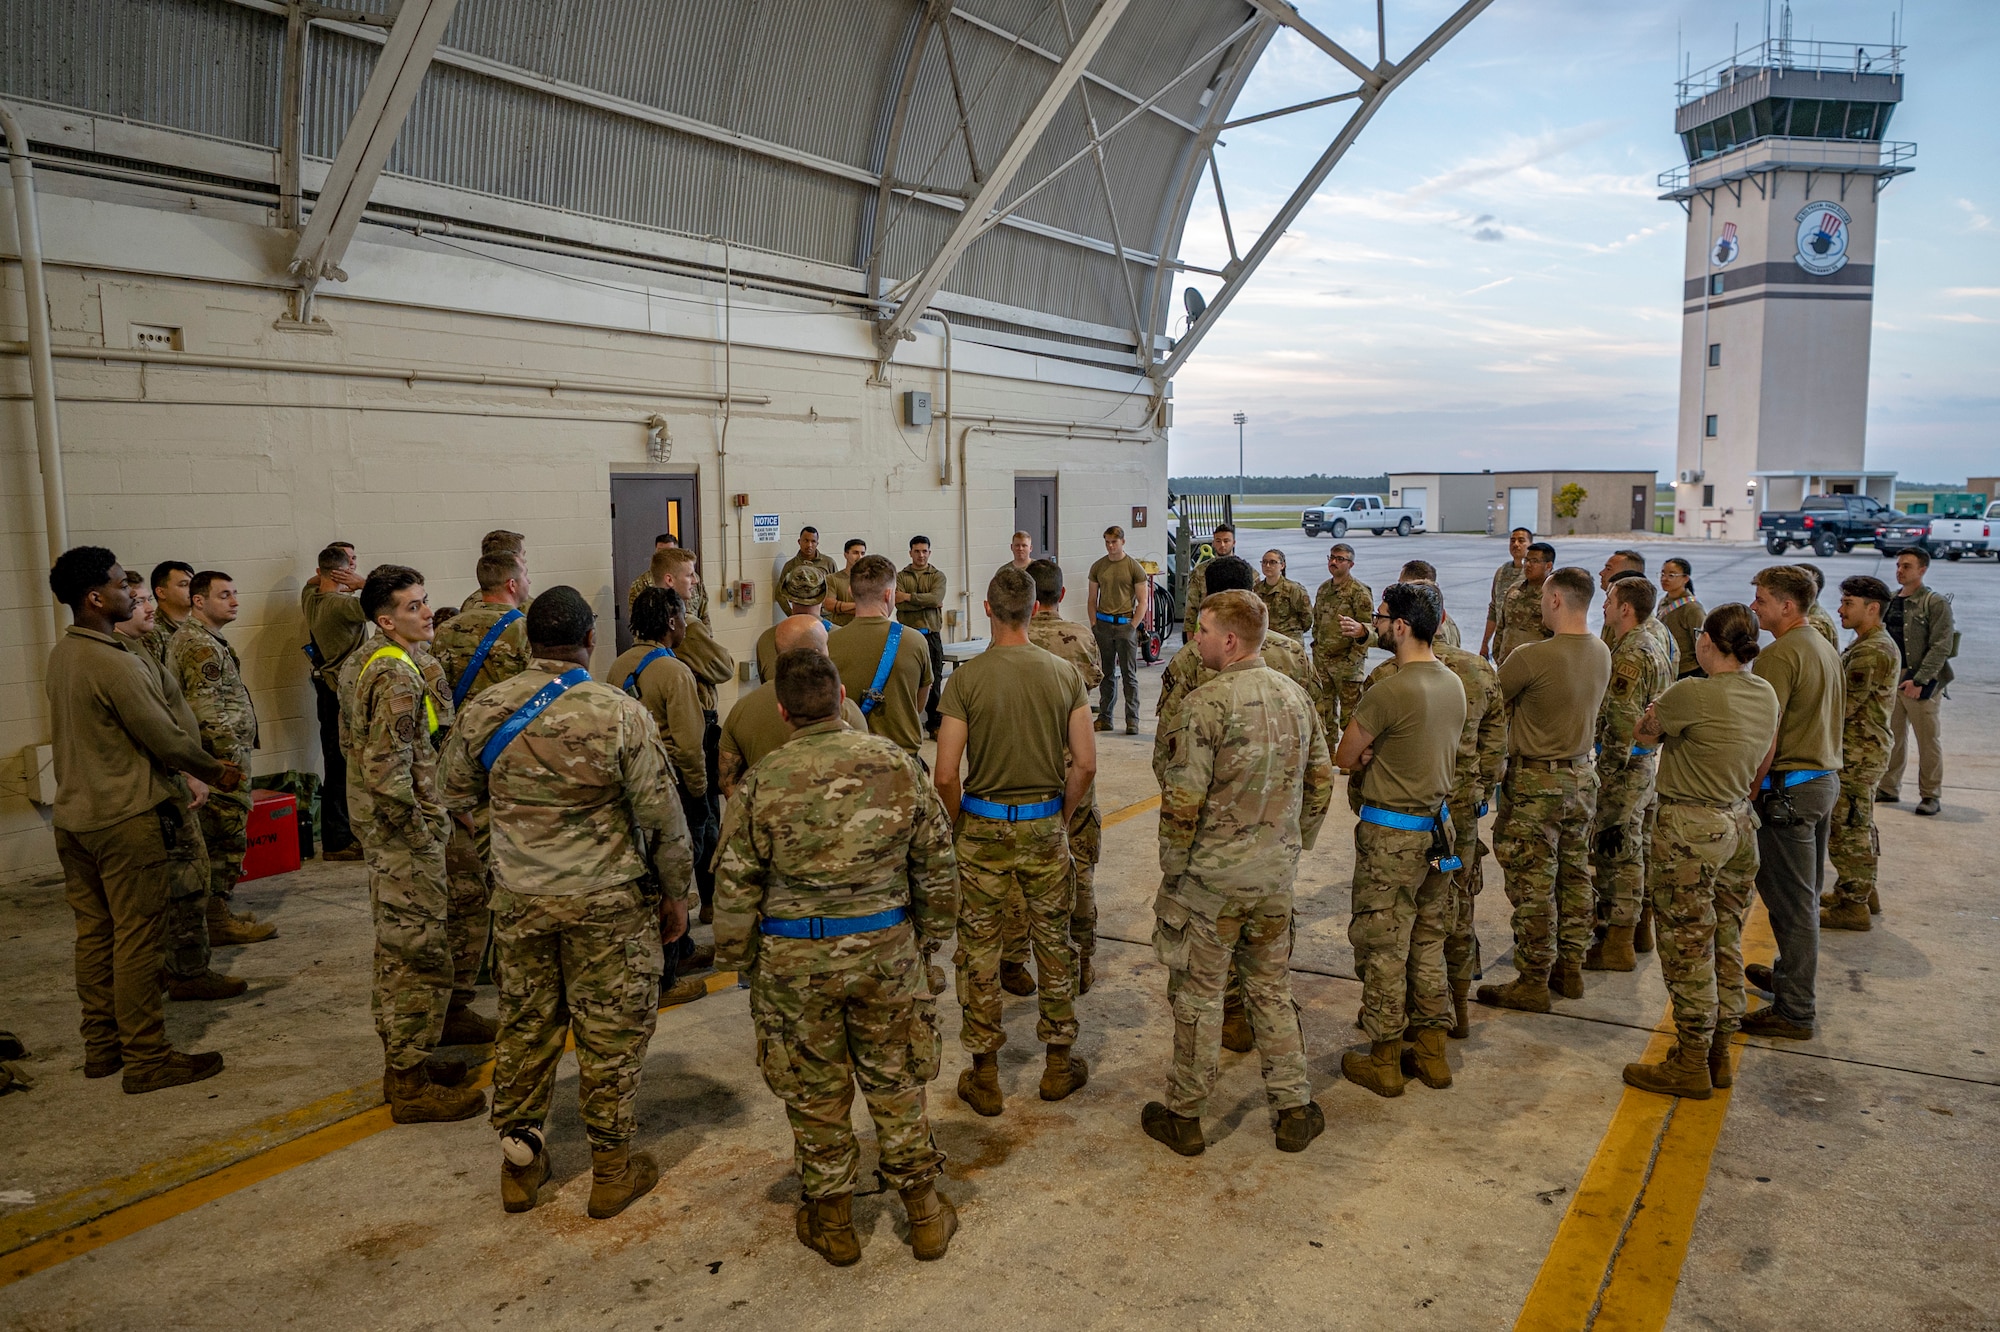 U.S. Air Force Airmen assigned to the 74th Fighter Generation Squadron receive a morning brief for Exercise Ready Tiger 24-1 at Avon Park Air Force Range, Florida, April 10, 2024. Small teams were quickly transported to an austere location to provide support and generate sorties while practicing Agile Combat Employment concepts. Built upon Air Combat Command's directive to assert air power in contested environments, Exercise Ready Tiger 24-1 aims to test and enhance the 23rd Wing’s proficiency in executing Lead Wing and Expeditionary Air Base concepts through Agile Combat Employment and command and control operations. (U.S. Air Force photo by Airman 1st Class Leonid Soubbotine)